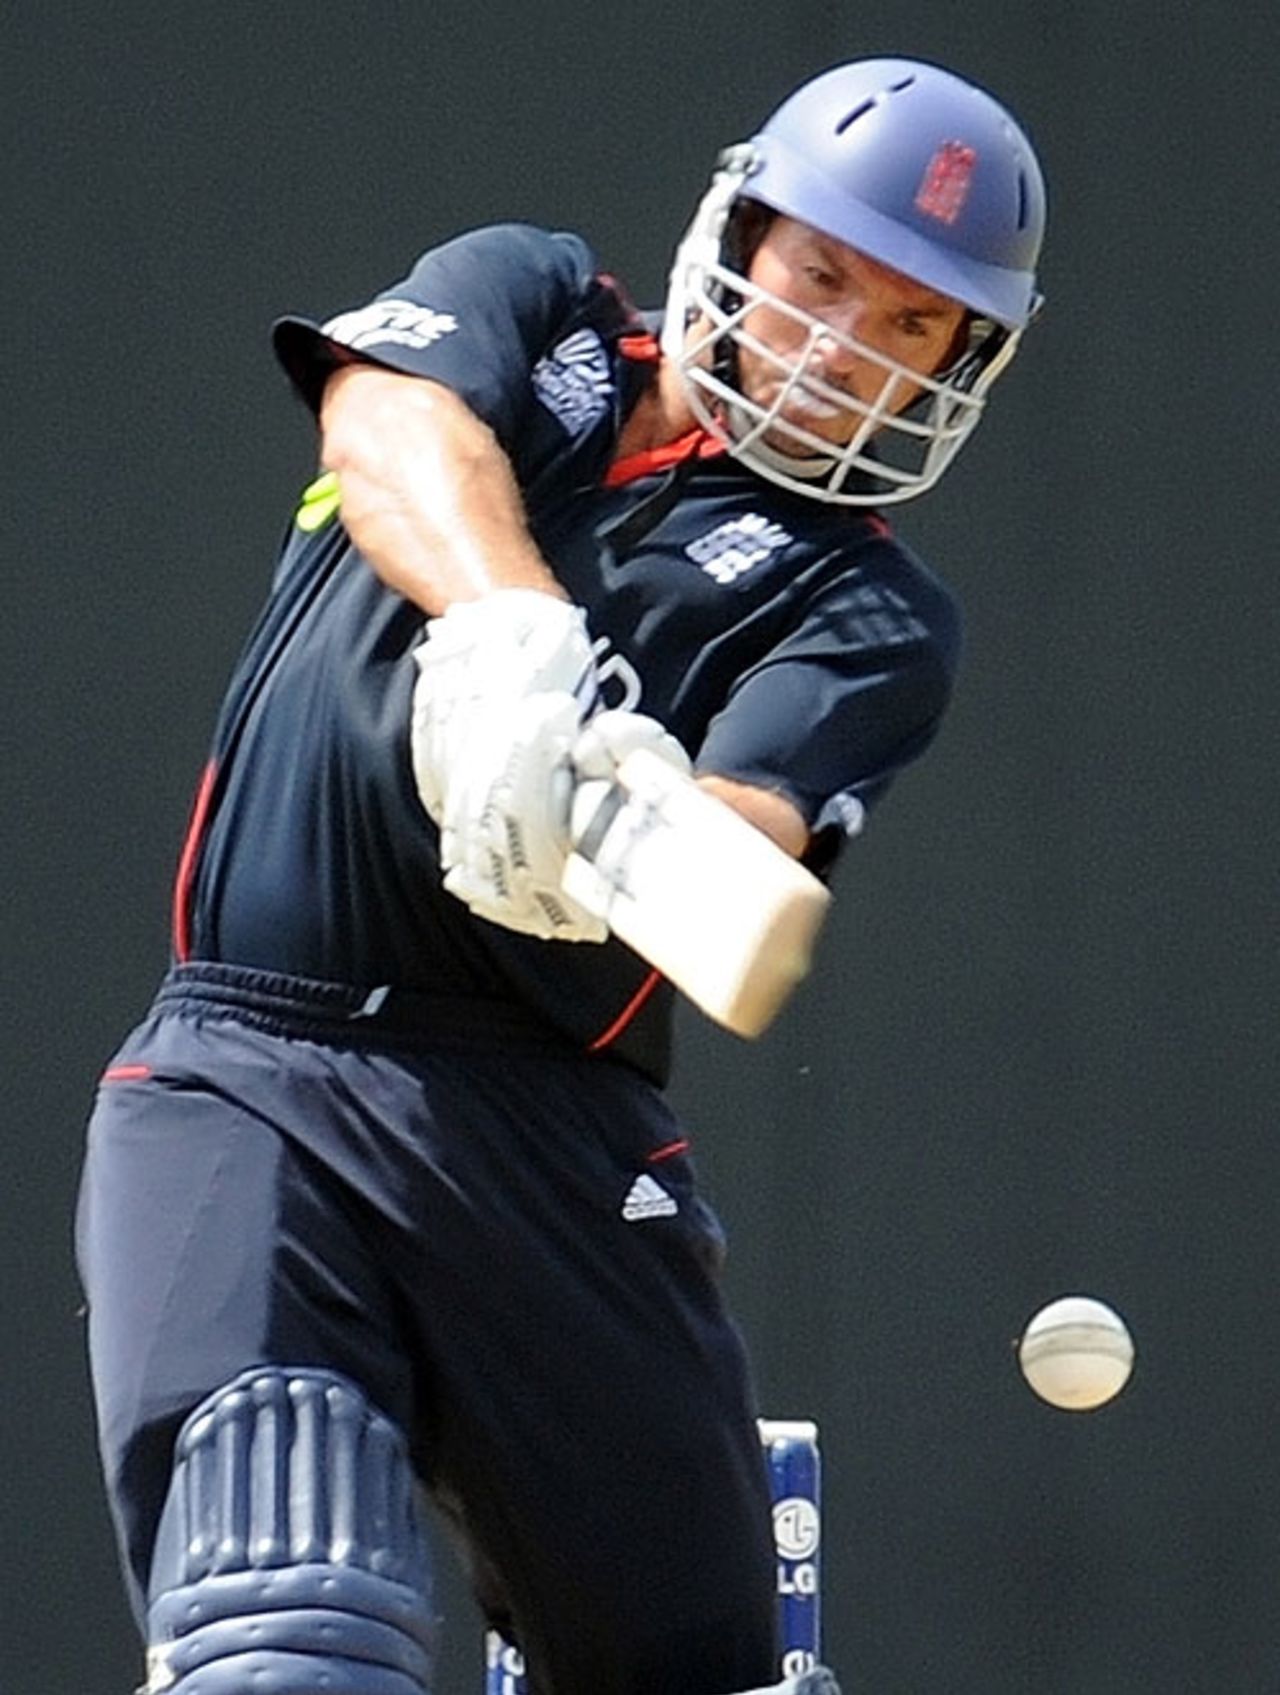 Michael Lumb marked his debut with 28 from 18 balls, West Indies v England, ICC World Twenty20, Guyana, May 3, 2010